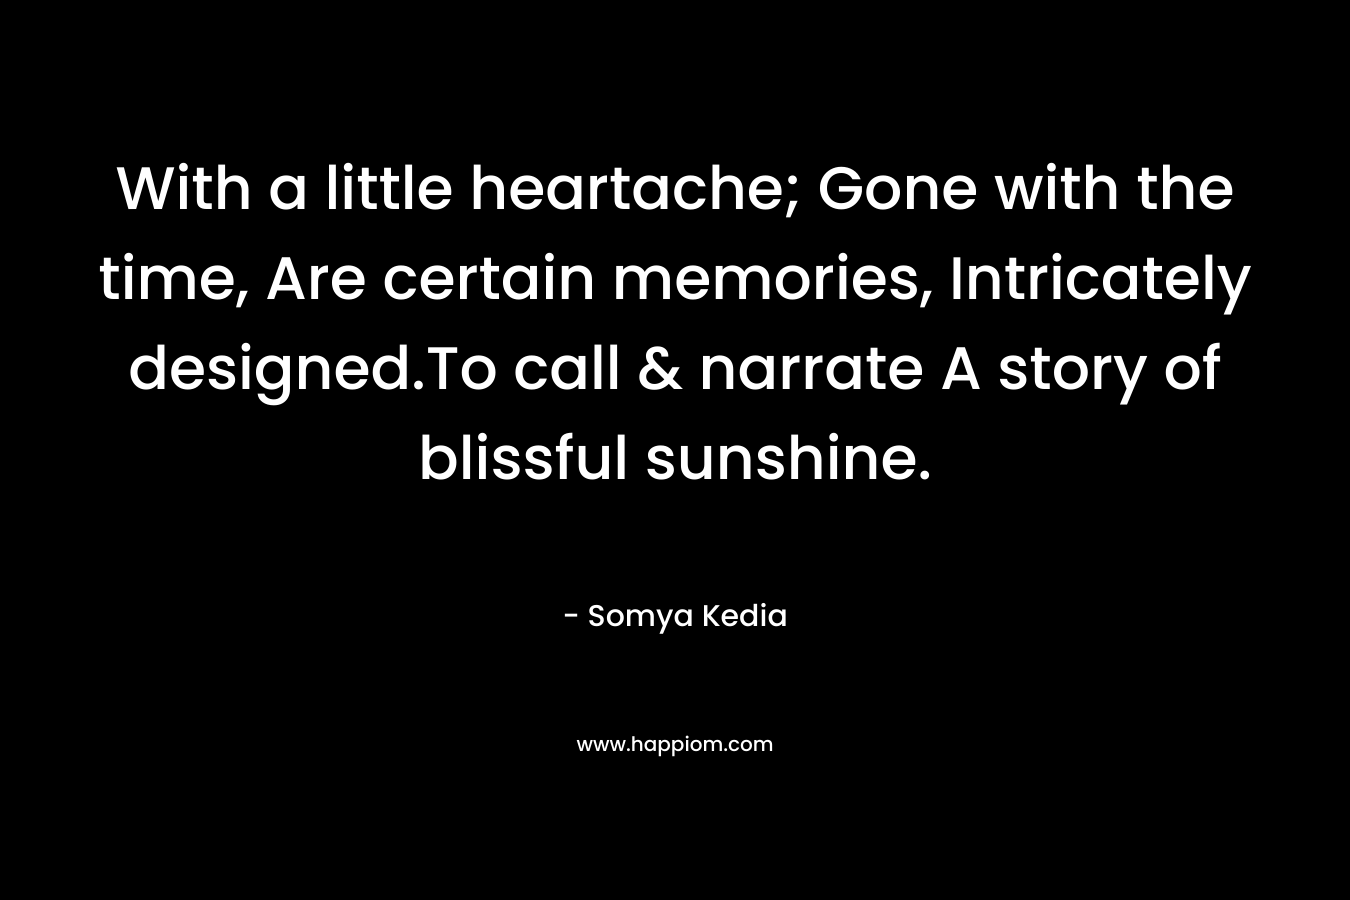 With a little heartache; Gone with the time, Are certain memories, Intricately designed.To call & narrate A story of blissful sunshine.